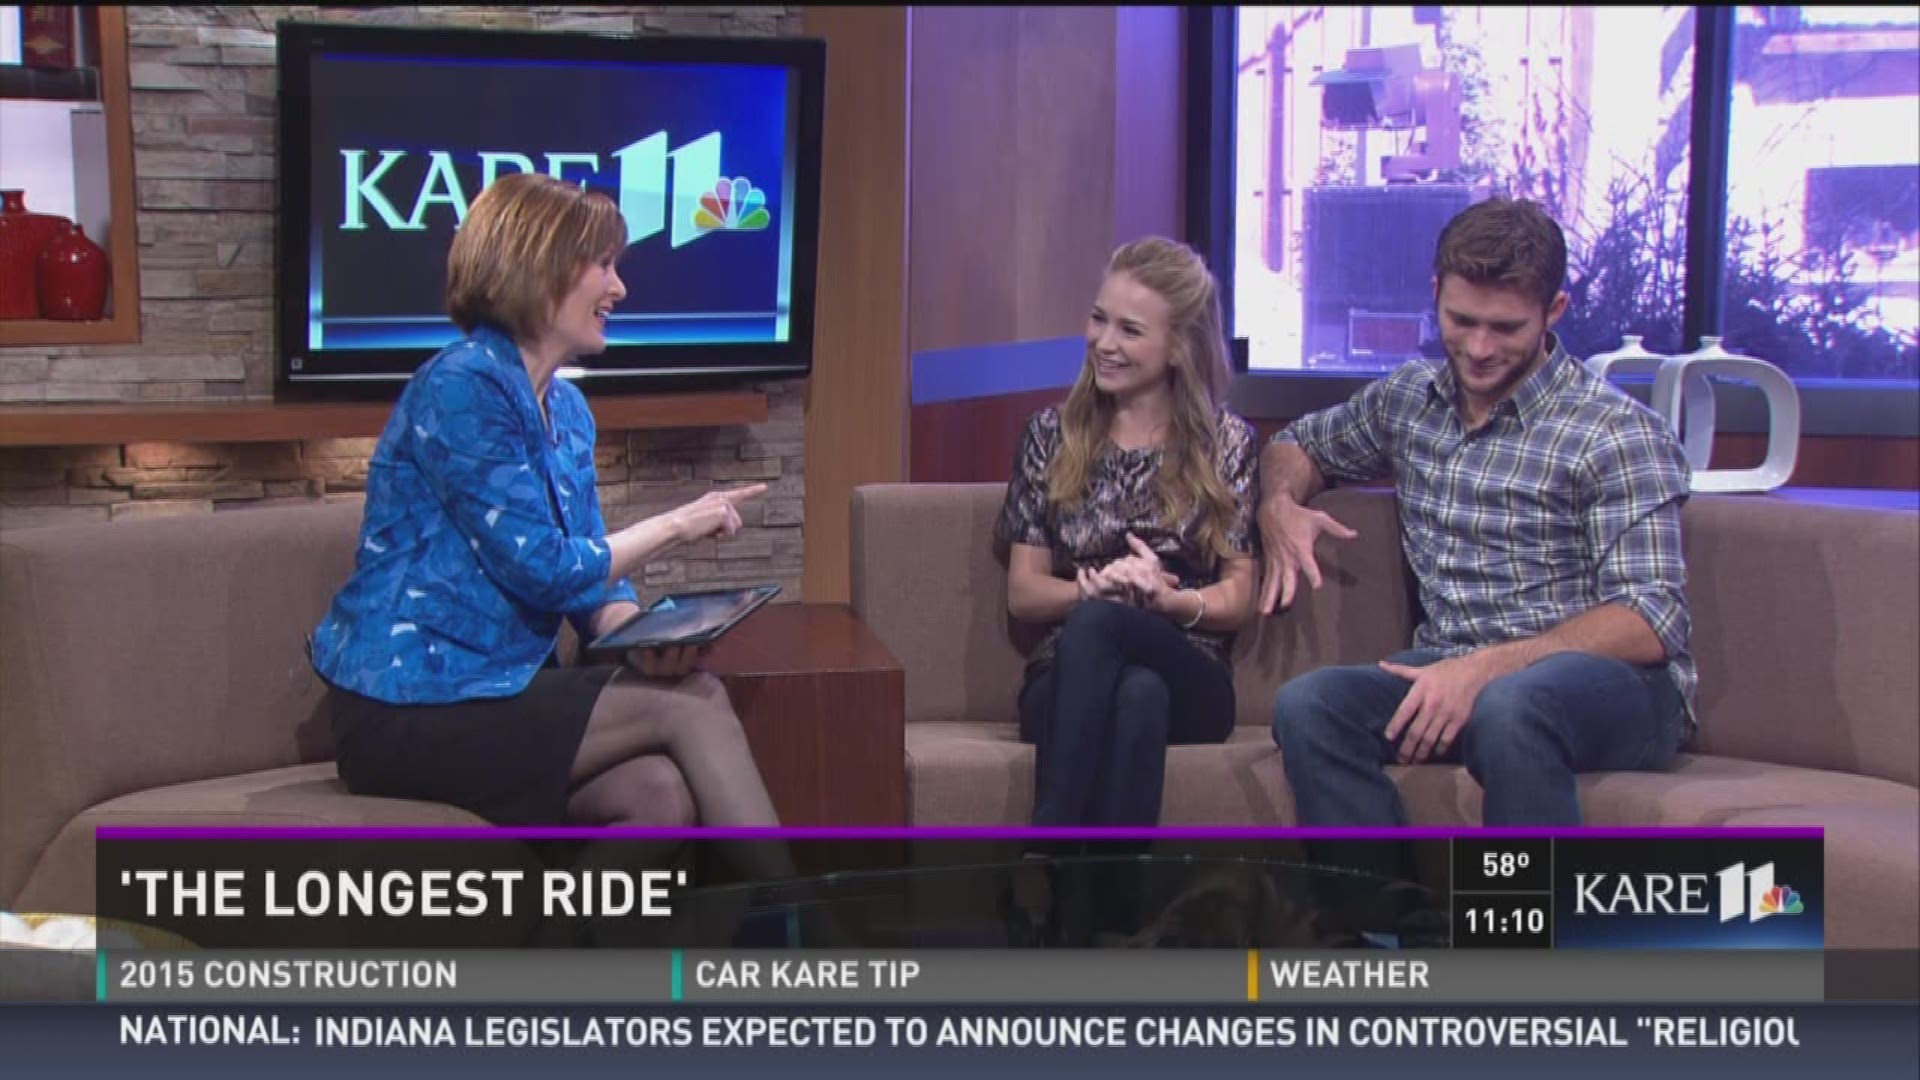 Scott Eastwood and Britt Robertson stopped by to talk about their movie.